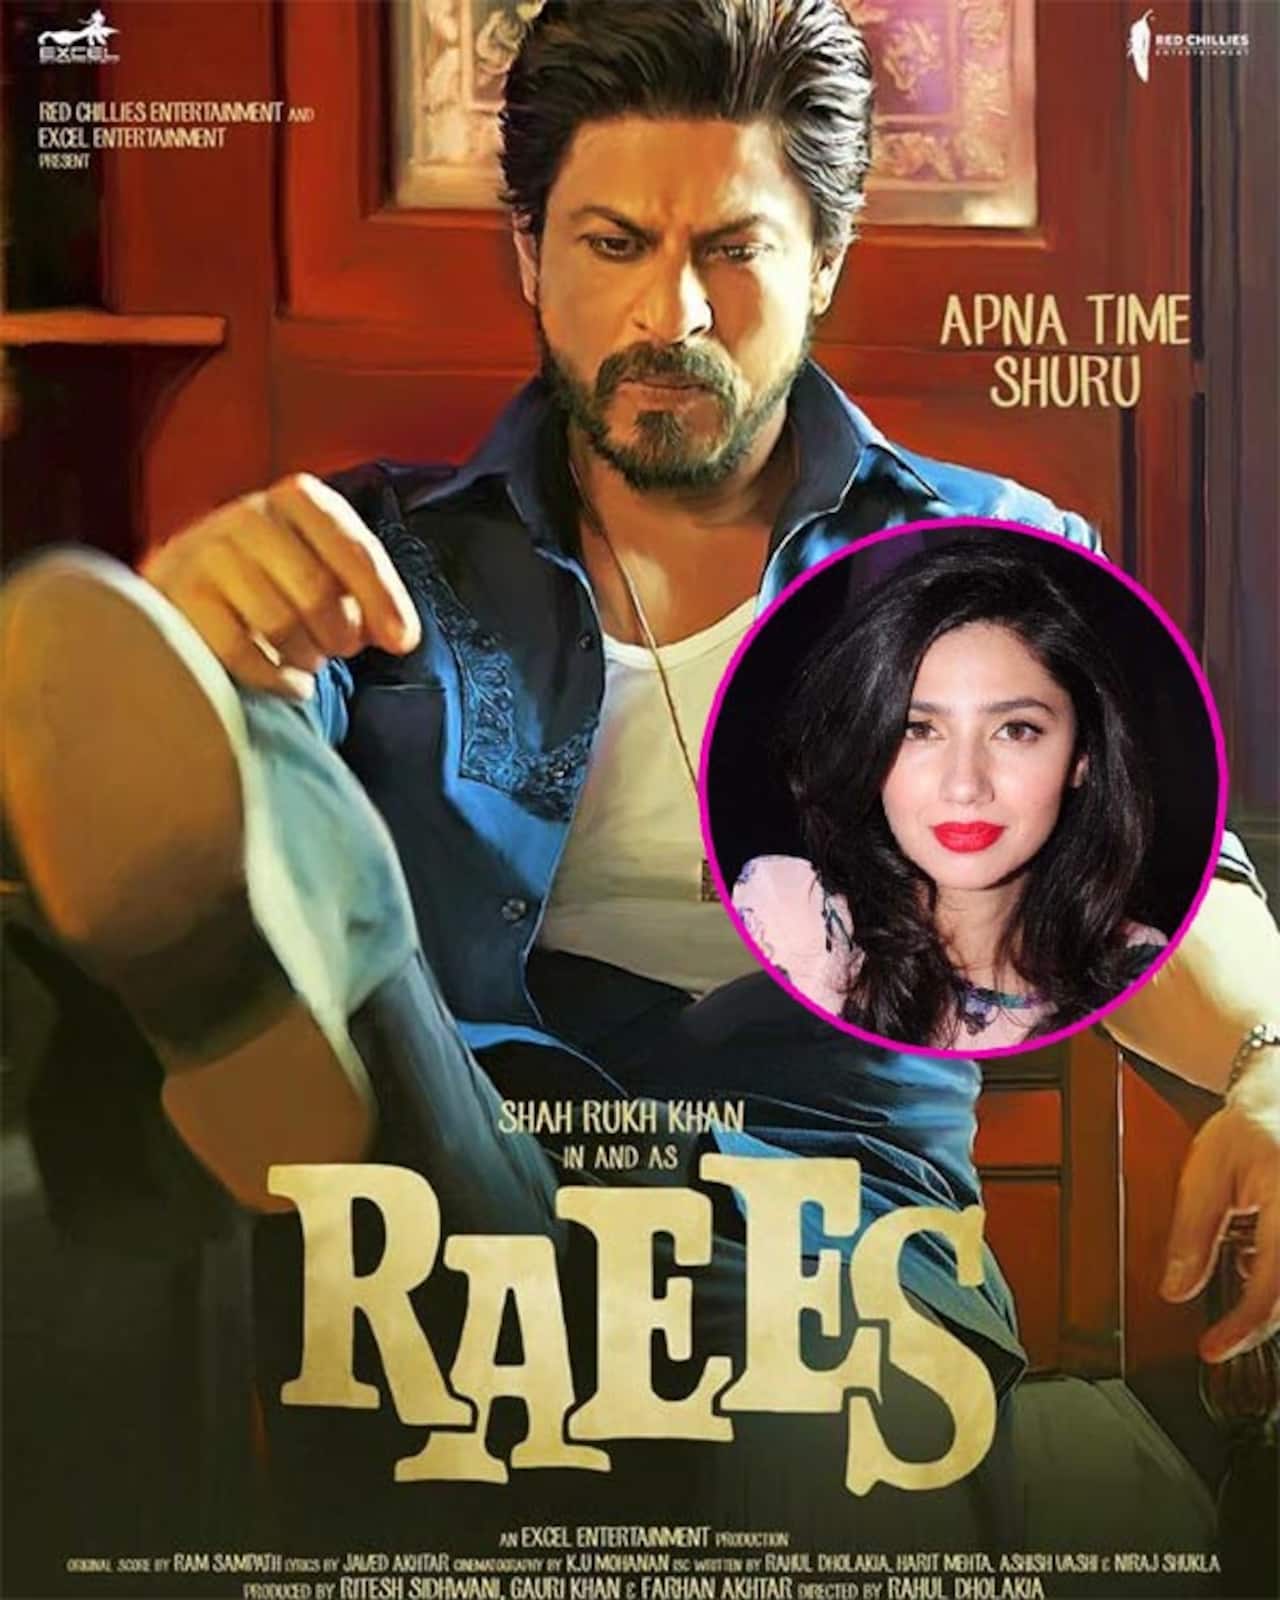 While Mahira Khan is not allowed to promote Raees, these two Pakistani actors will shoot for a month in India - read details